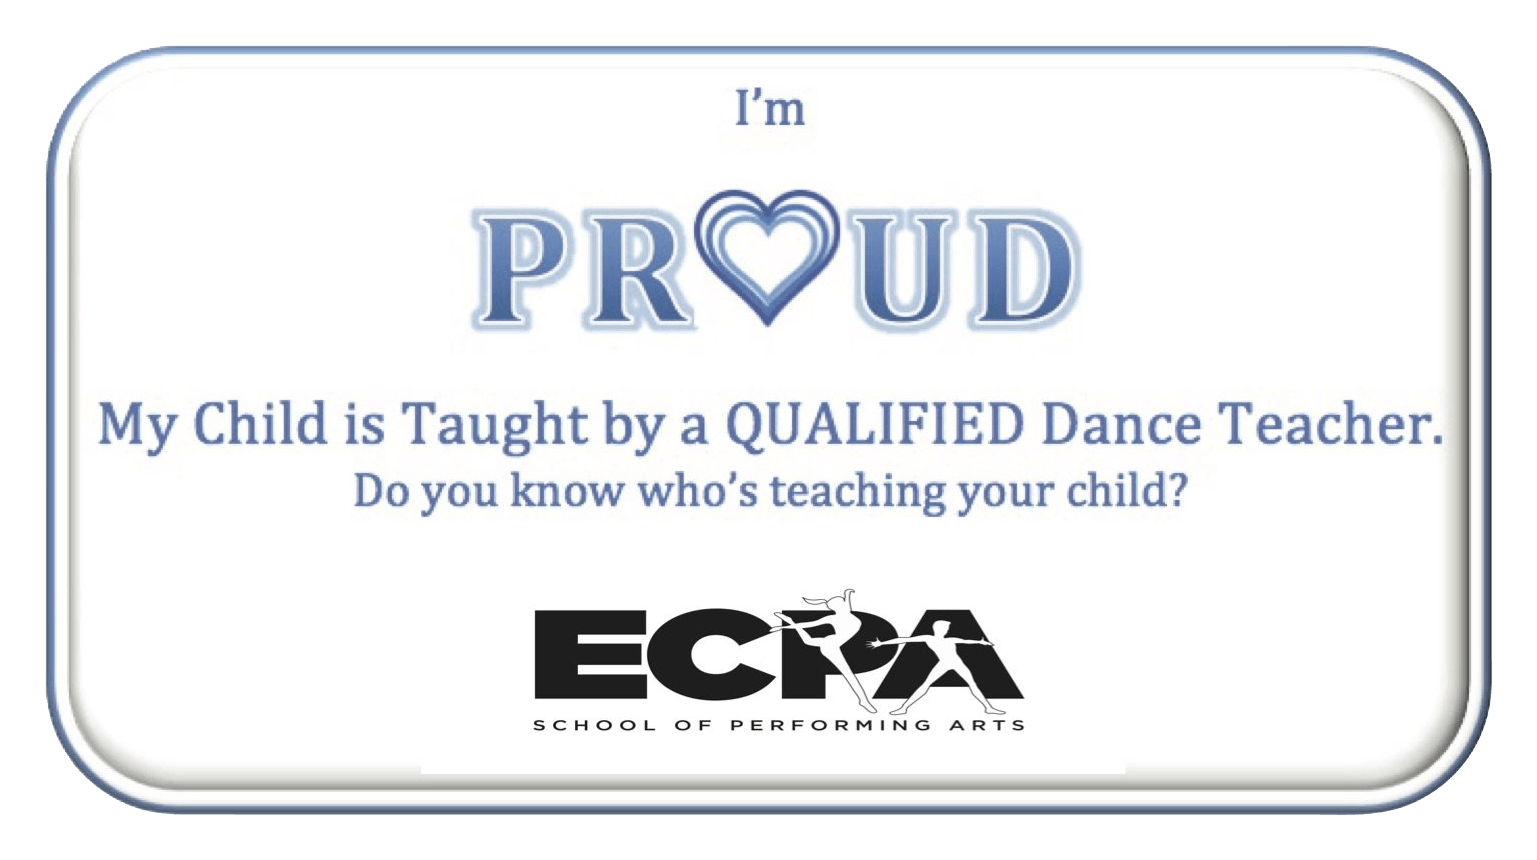 I'm PROUD my child is taught by a qualified Dance Teacher. Do you know who's teaching your child?